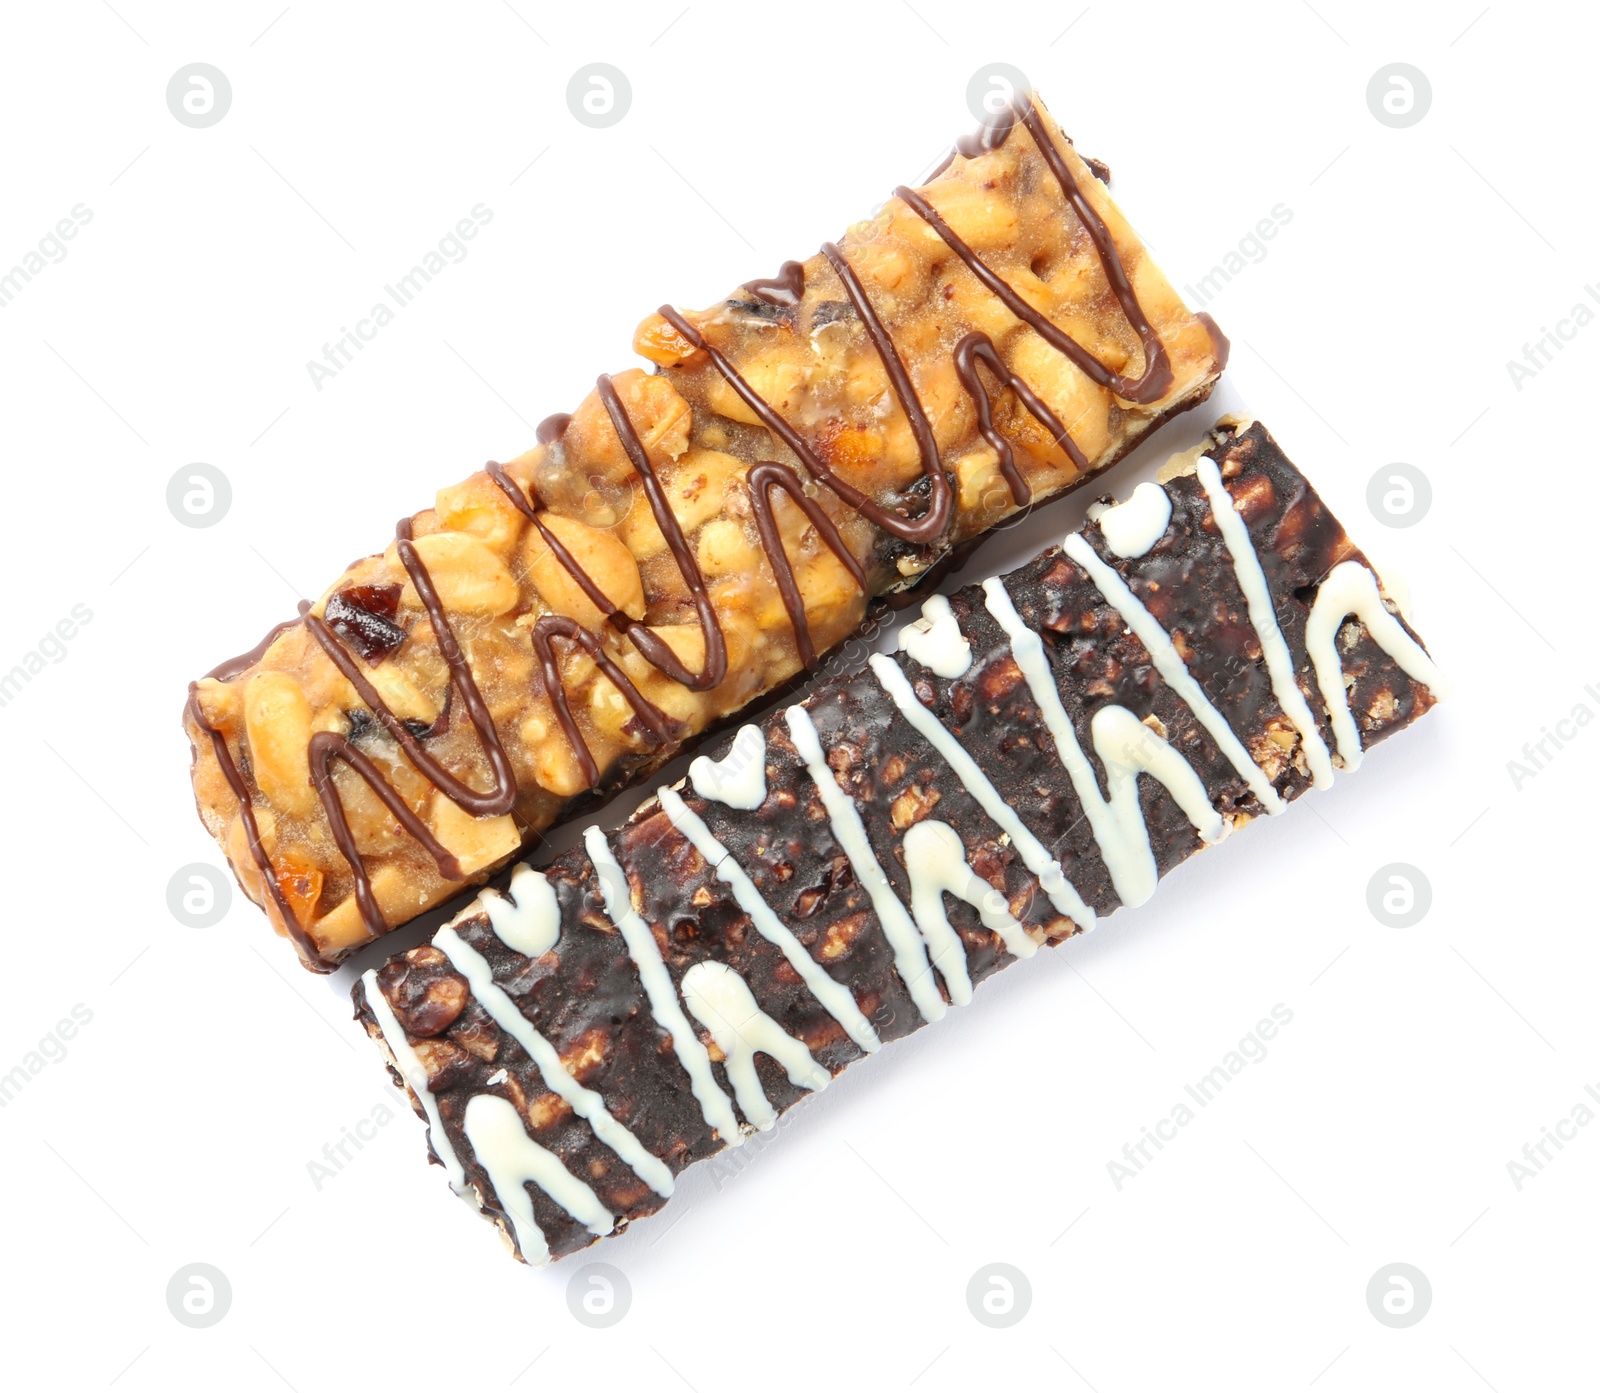 Photo of Different grain cereal bars on white background. Healthy snack